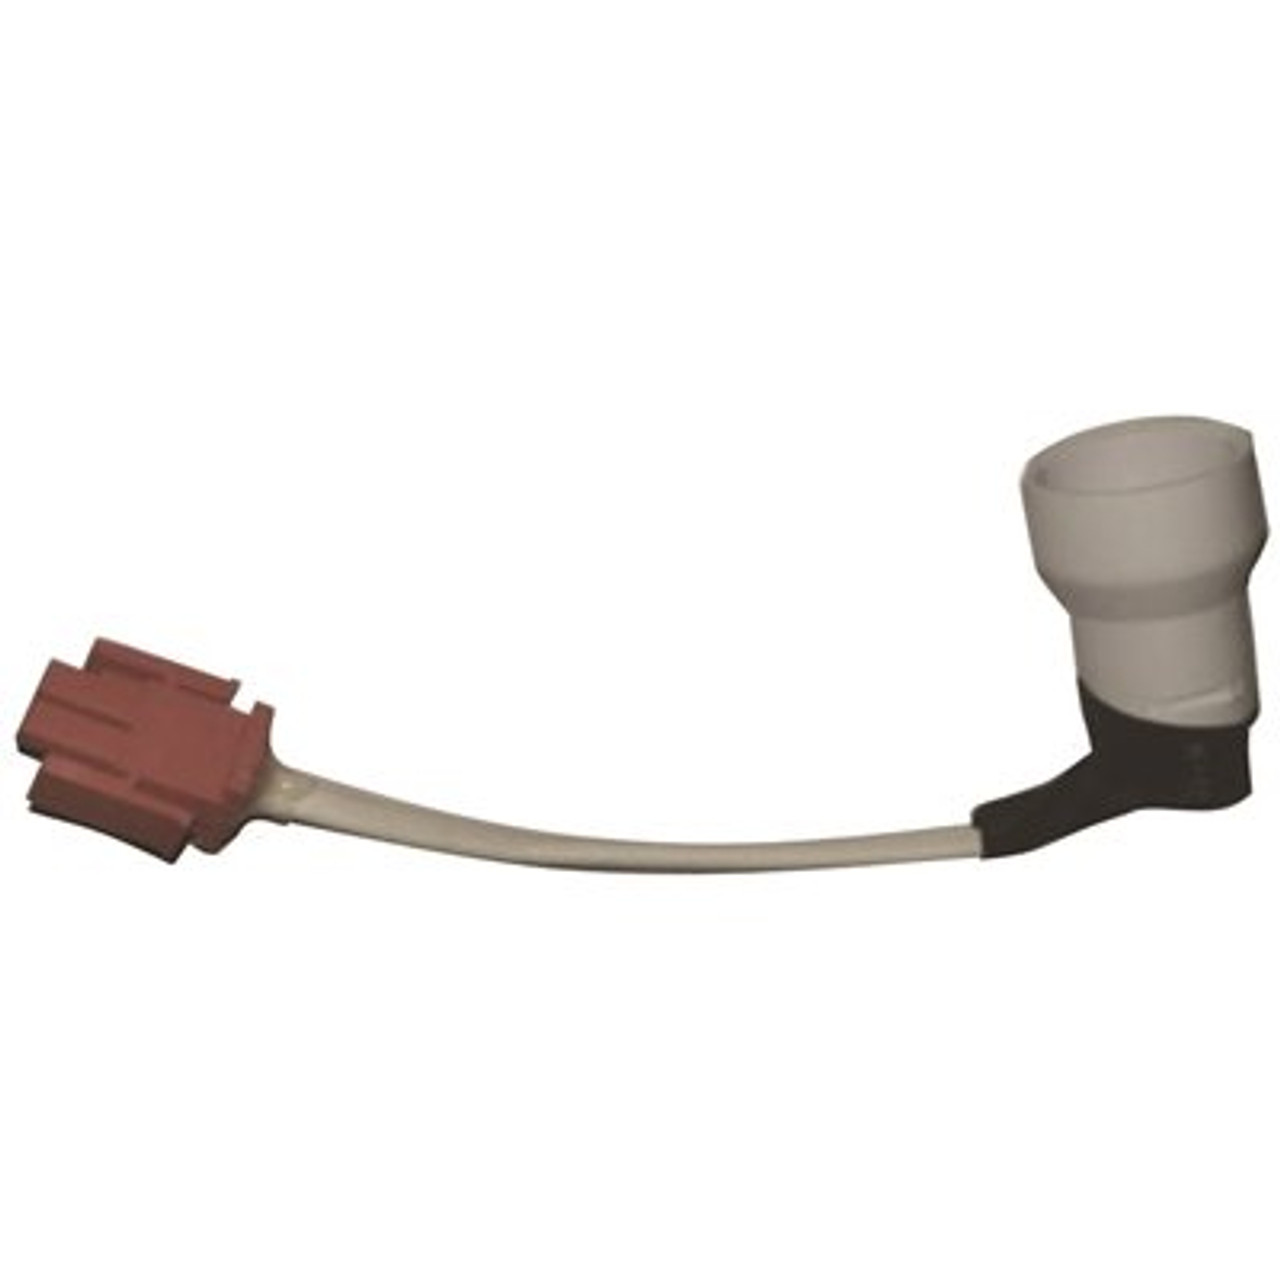 Midea Lamp Holder for MDTF18 Model Numbers